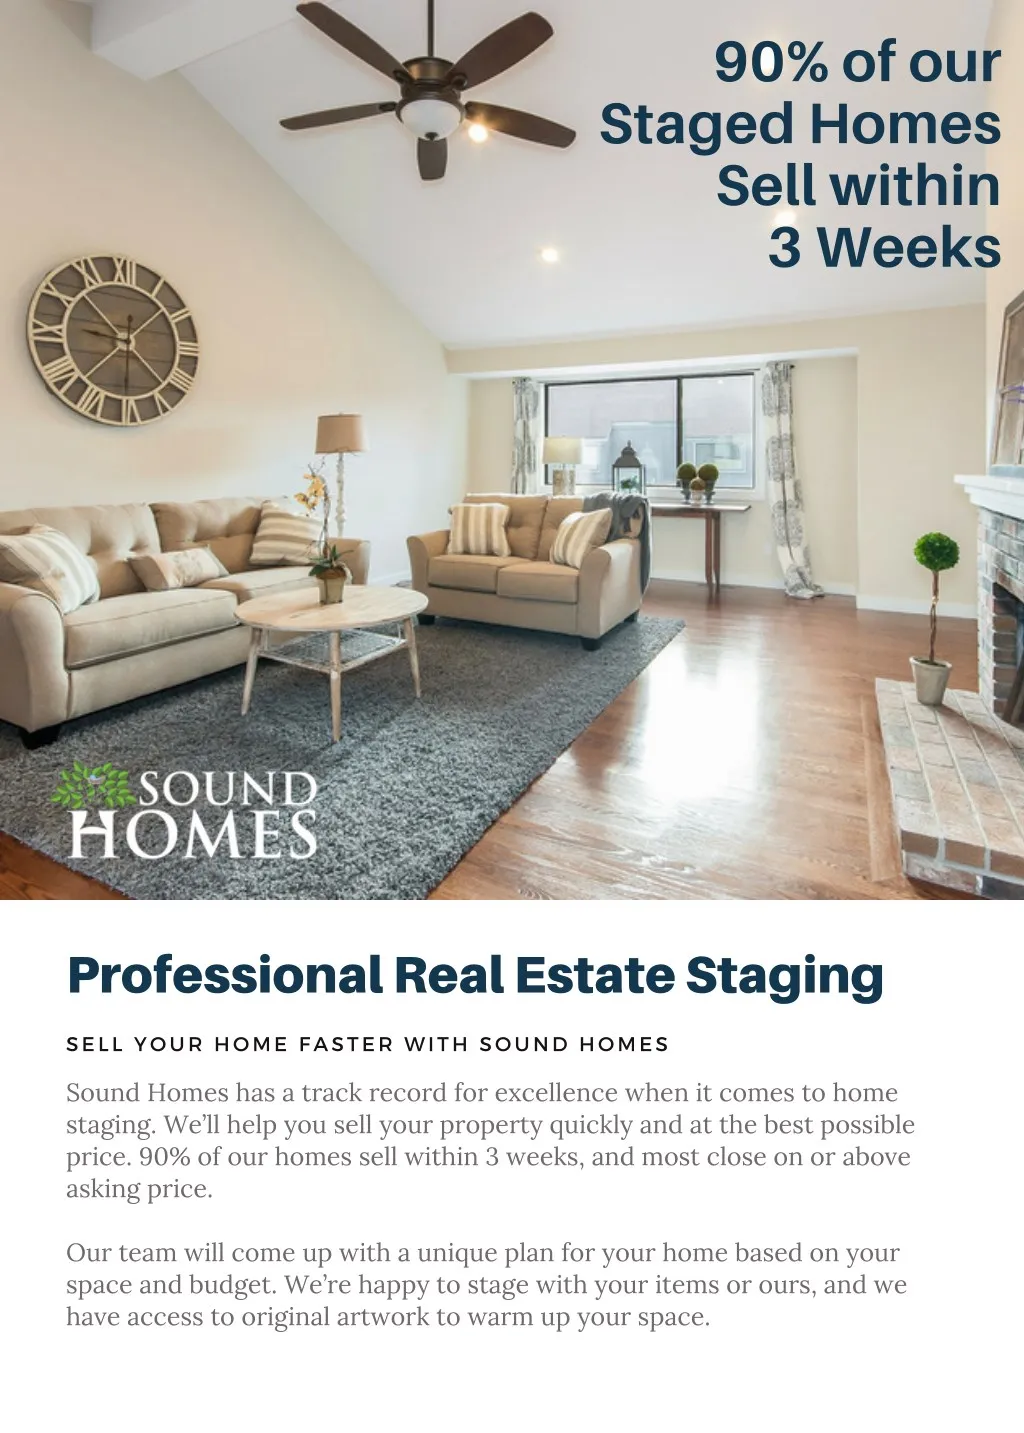 90 of our staged homes sell within 3 weeks